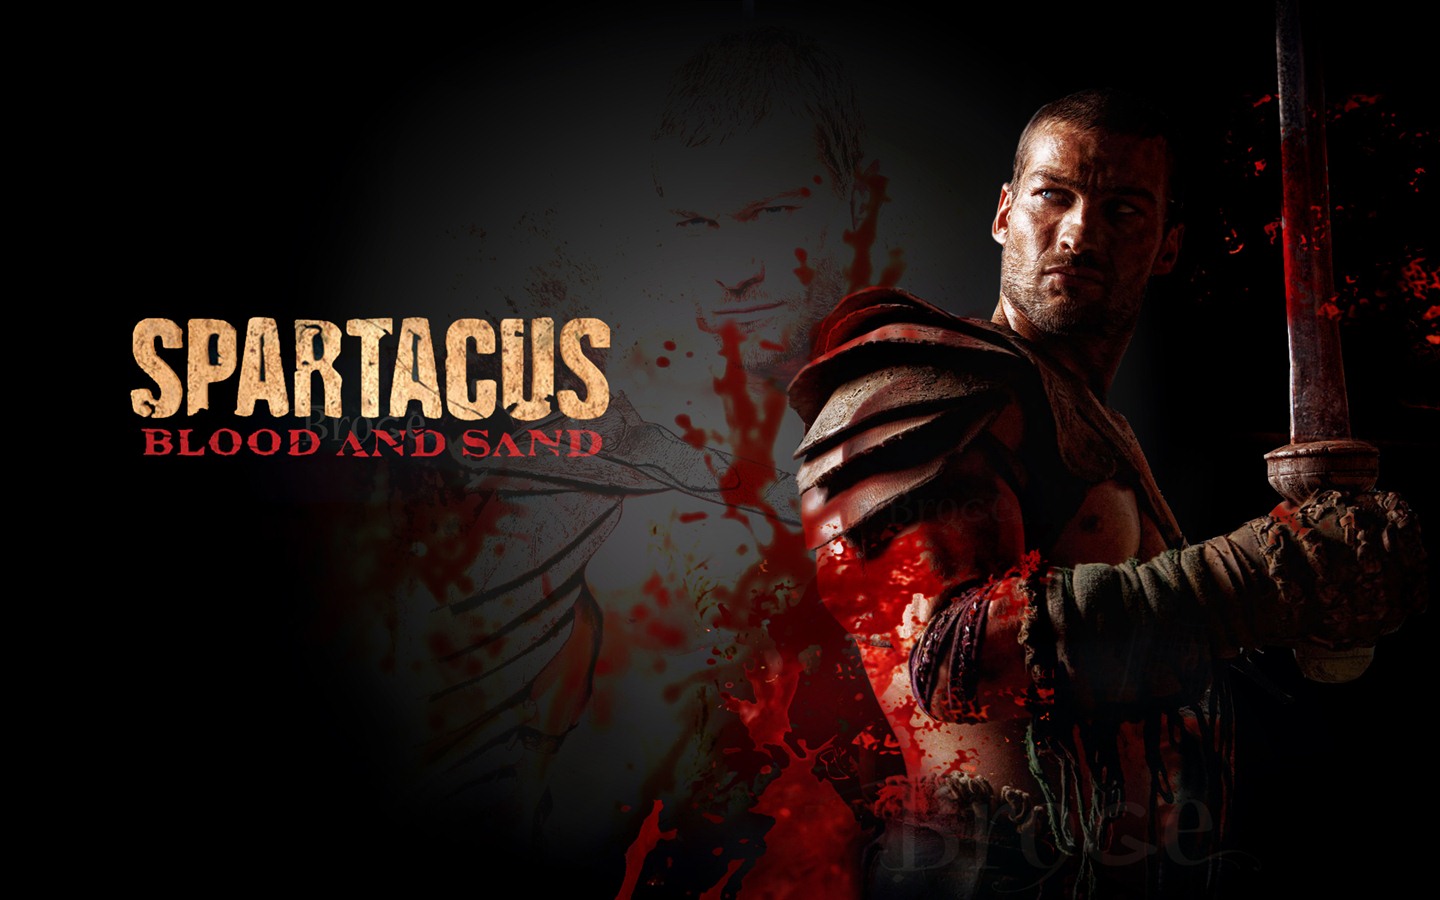 Spartacus: Blood and Sand HD Wallpaper #13 - 1440x900